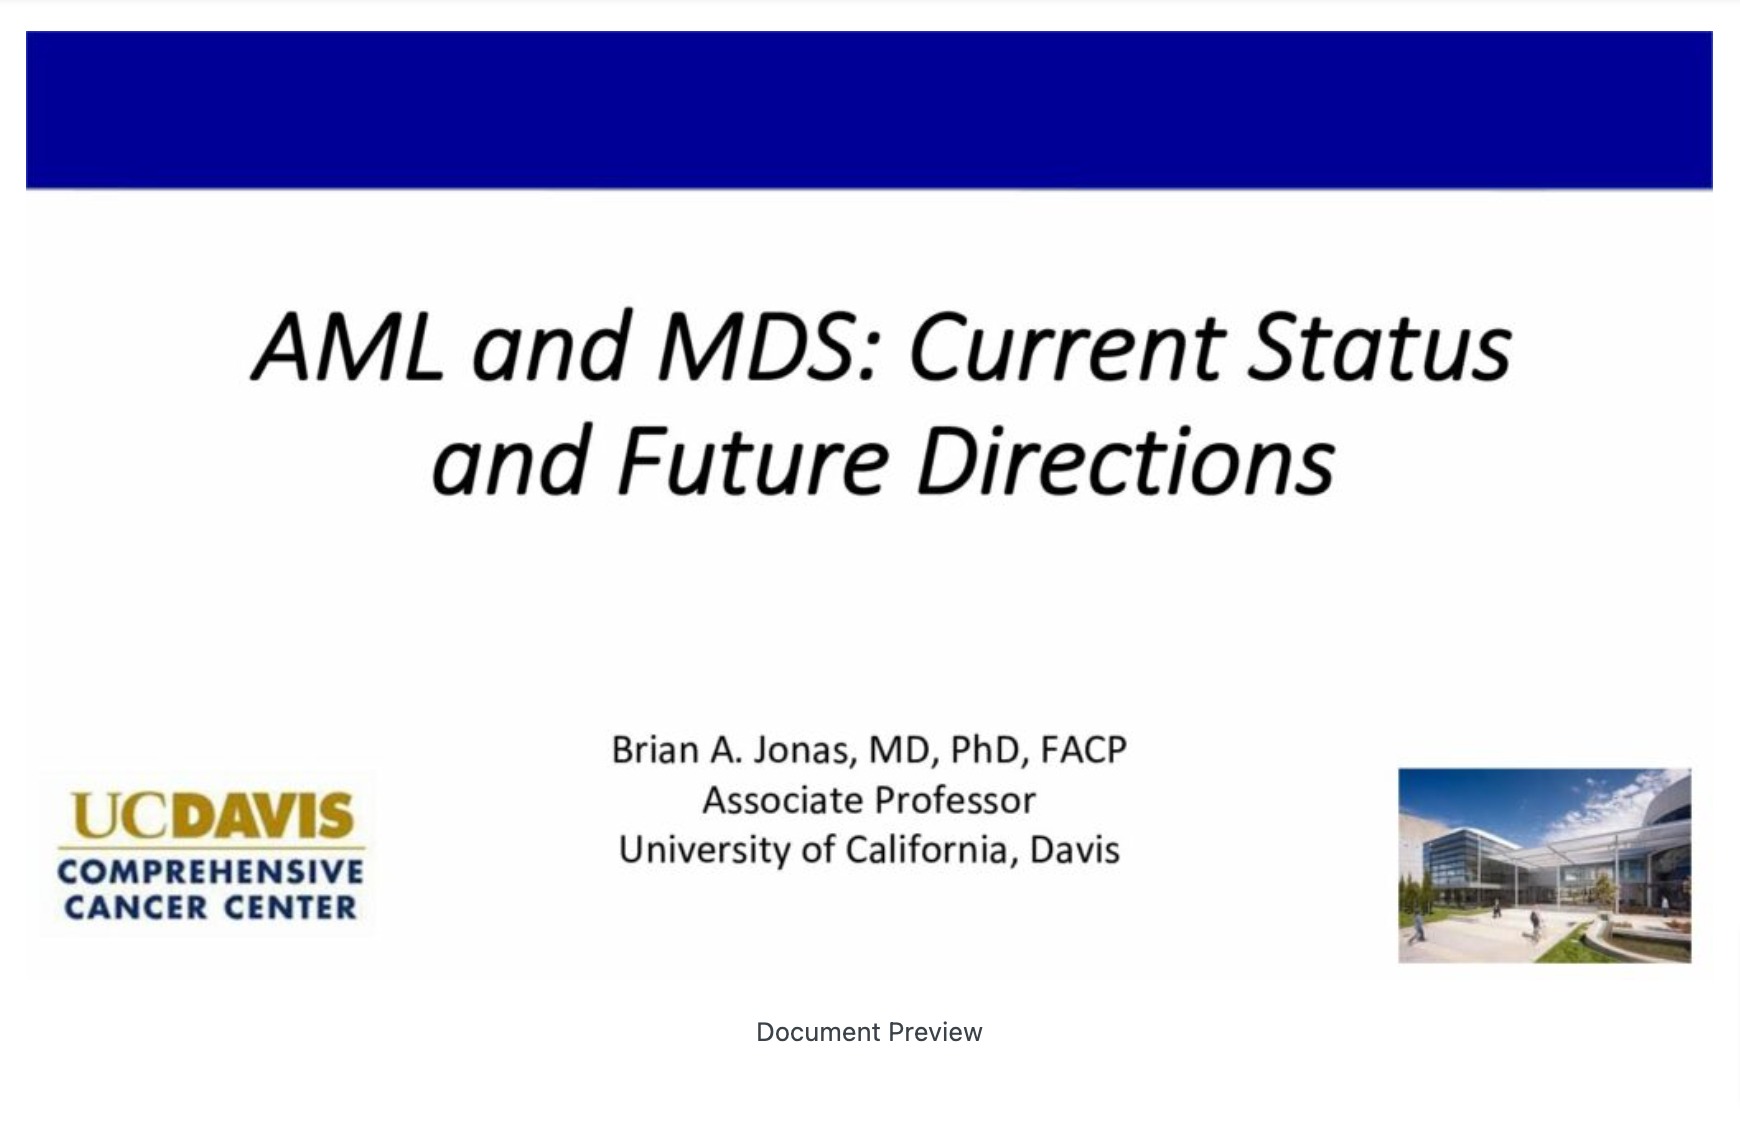 AML and MDS: Current Status and Future Directions